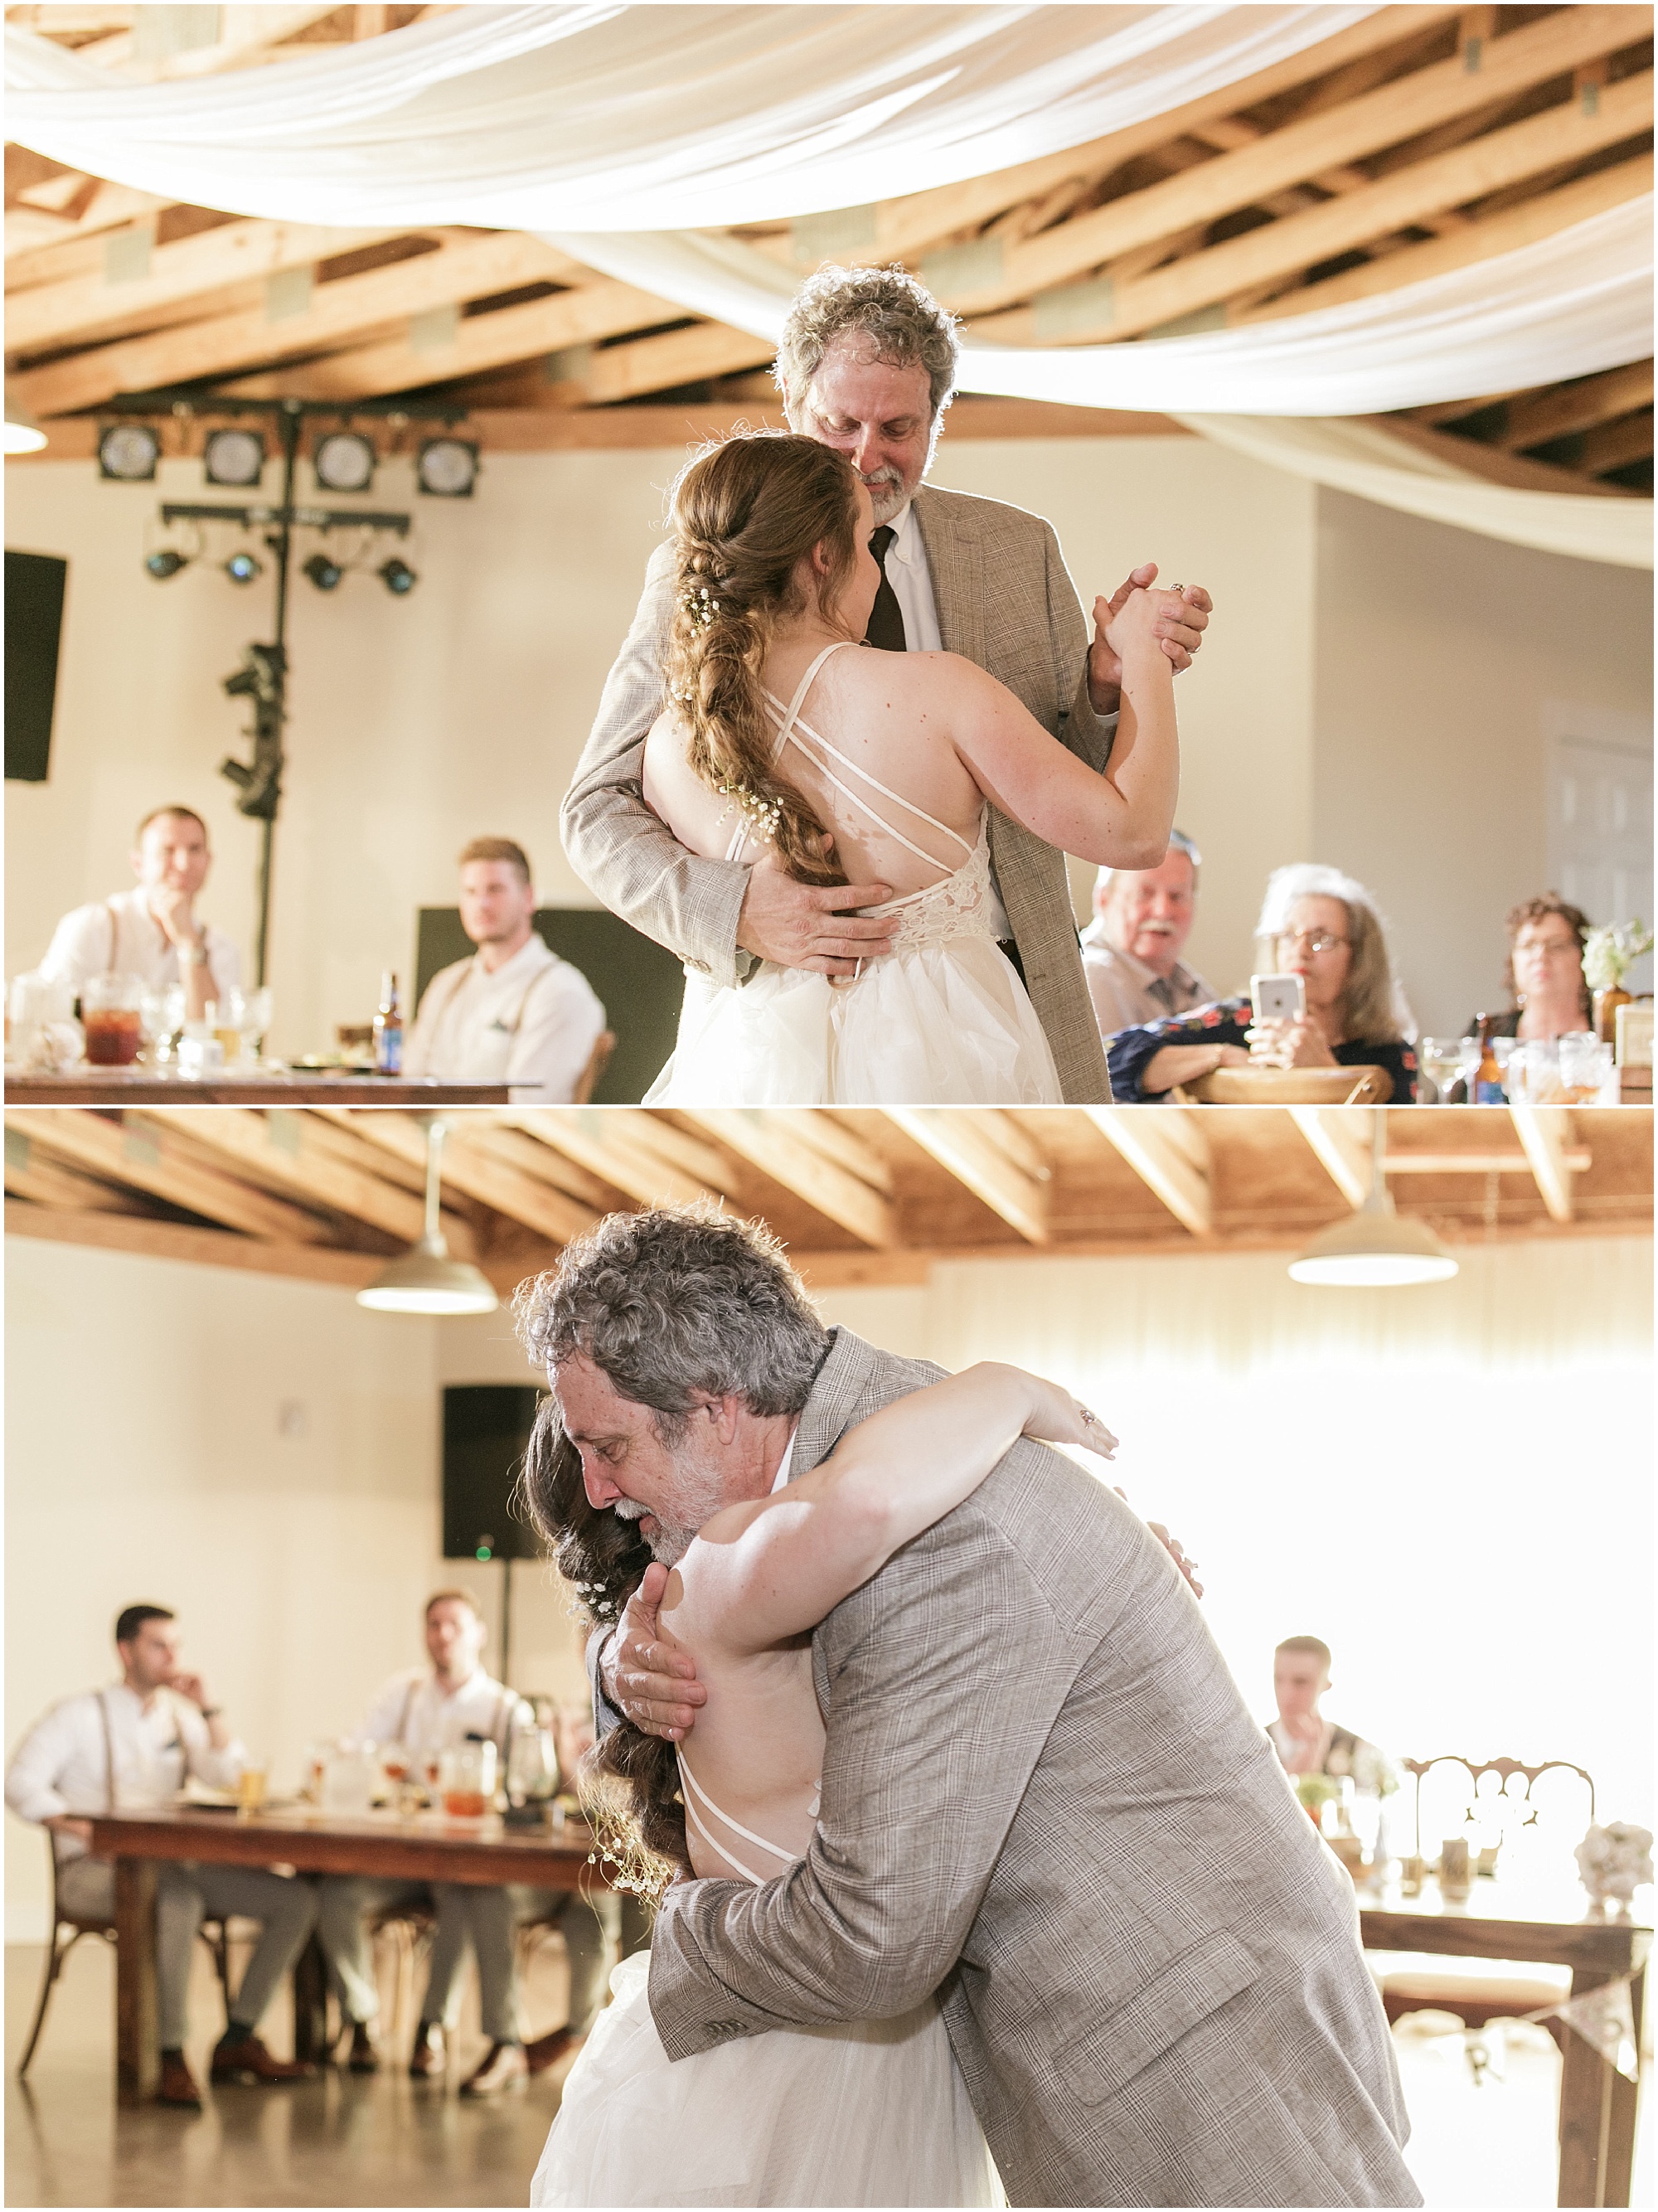 Bride dancing with her father at her wedding